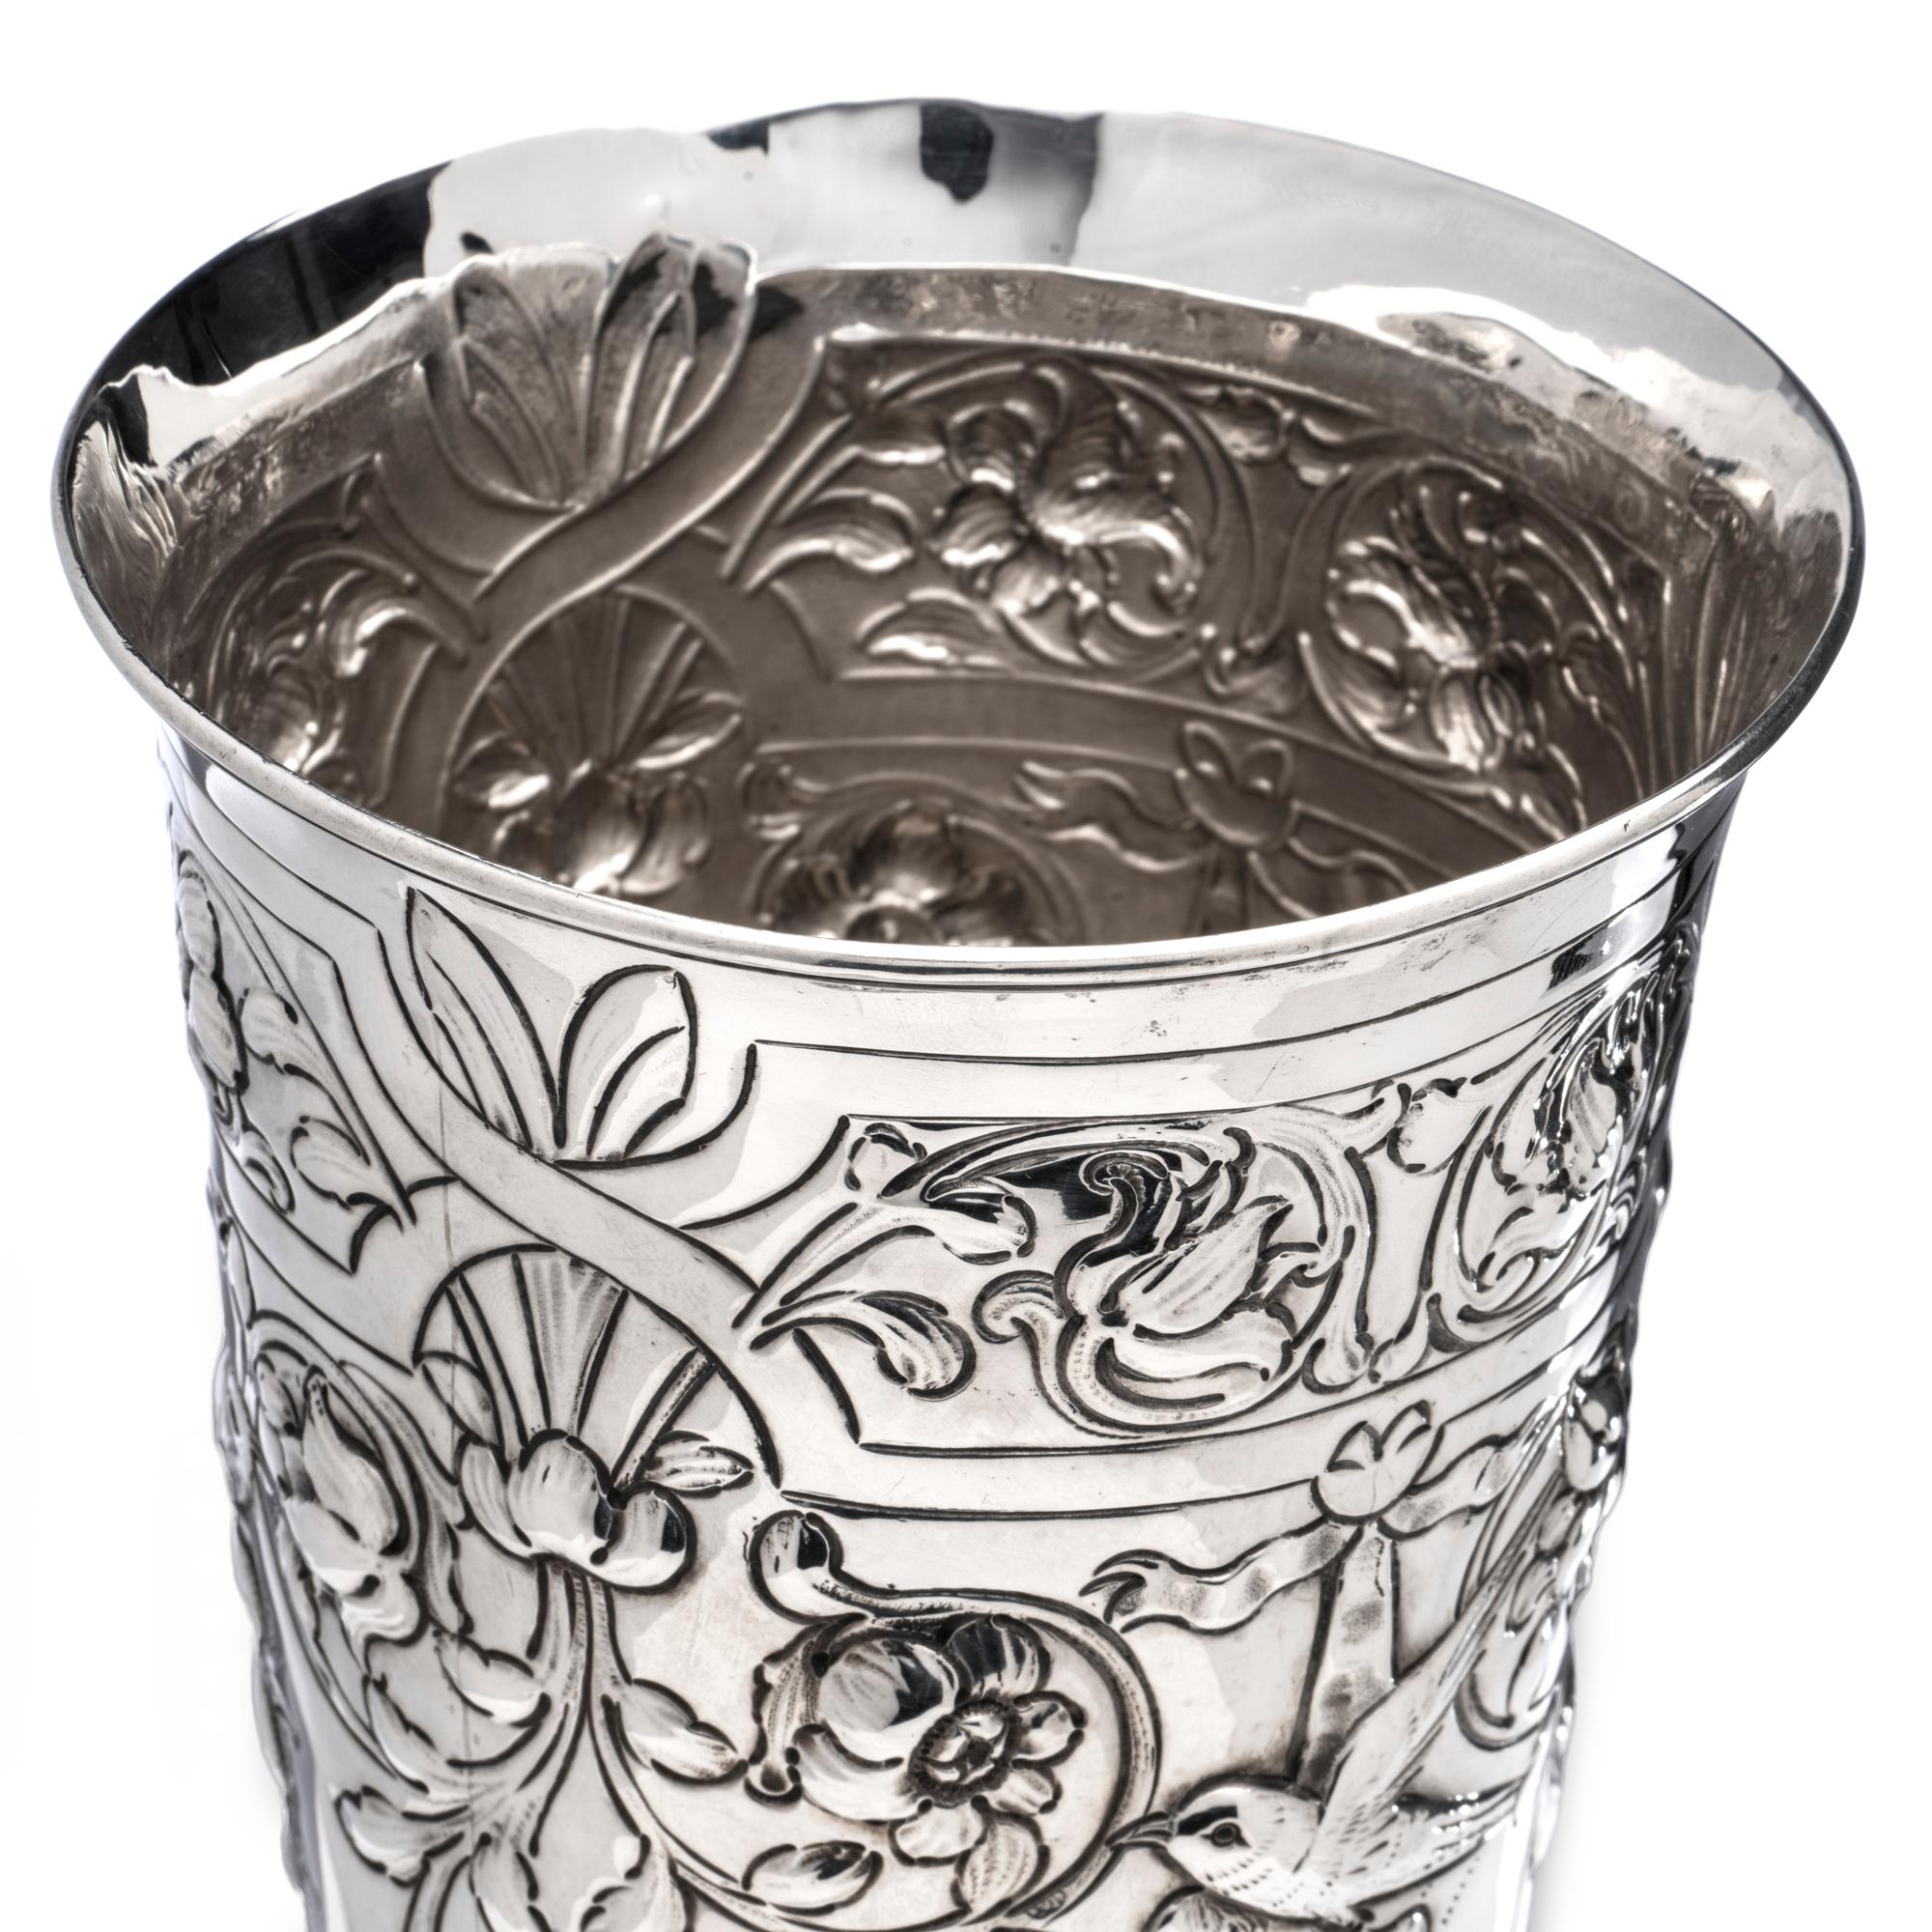 Antique Silver Vase Decorated with Floral Motifs For Sale 1